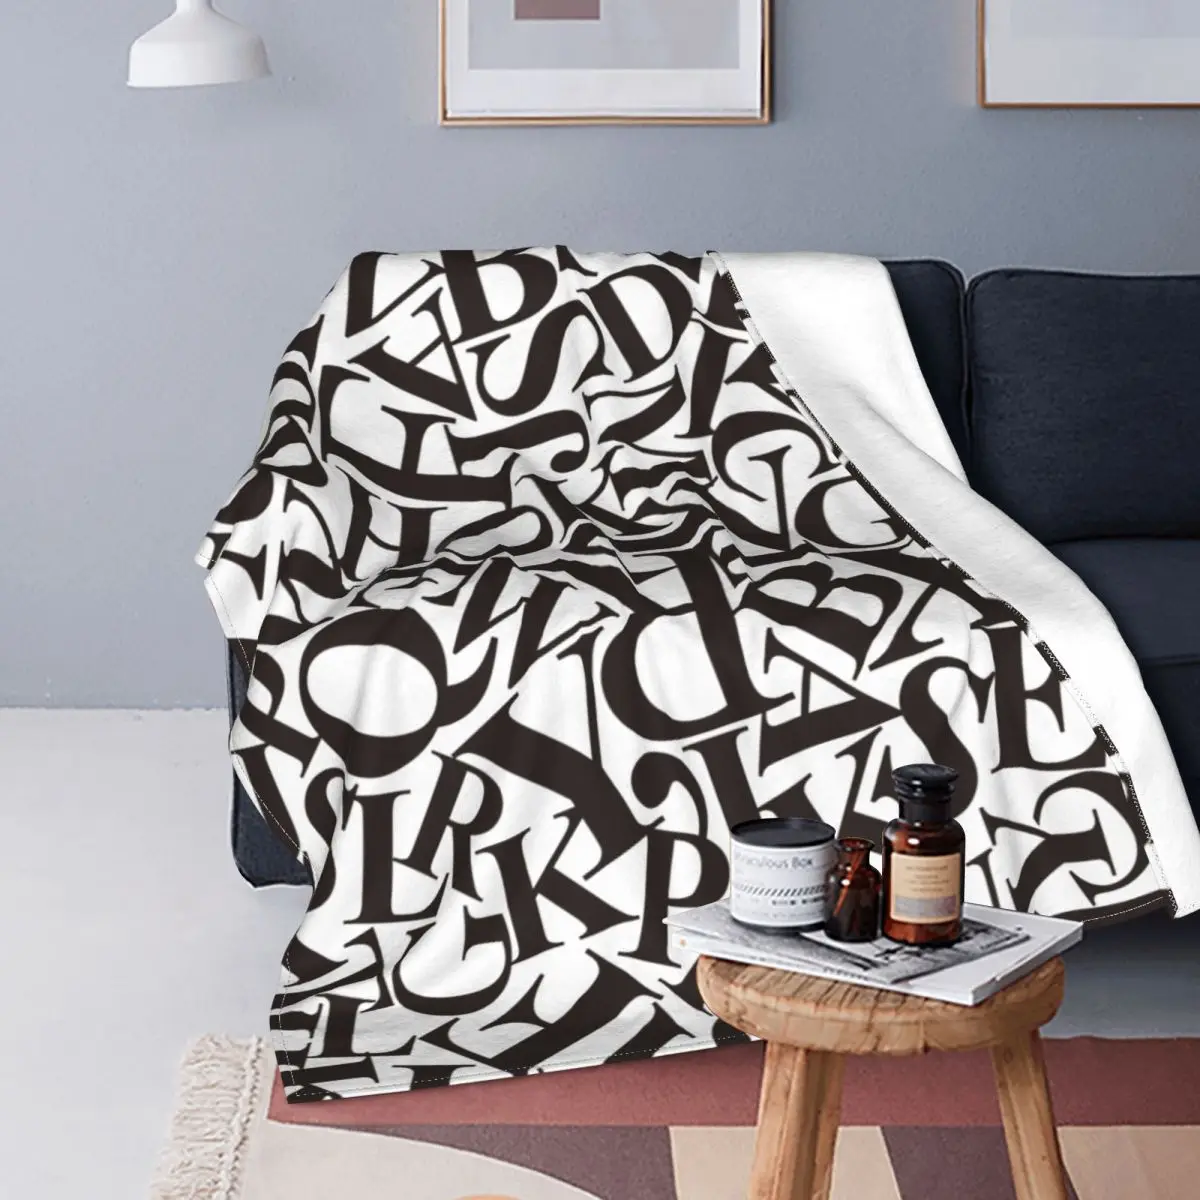 

Vintage Graffiti Fleece Blanket Letters Awesome Throw Blankets for Sofa Bedding Lounge 150*125cm